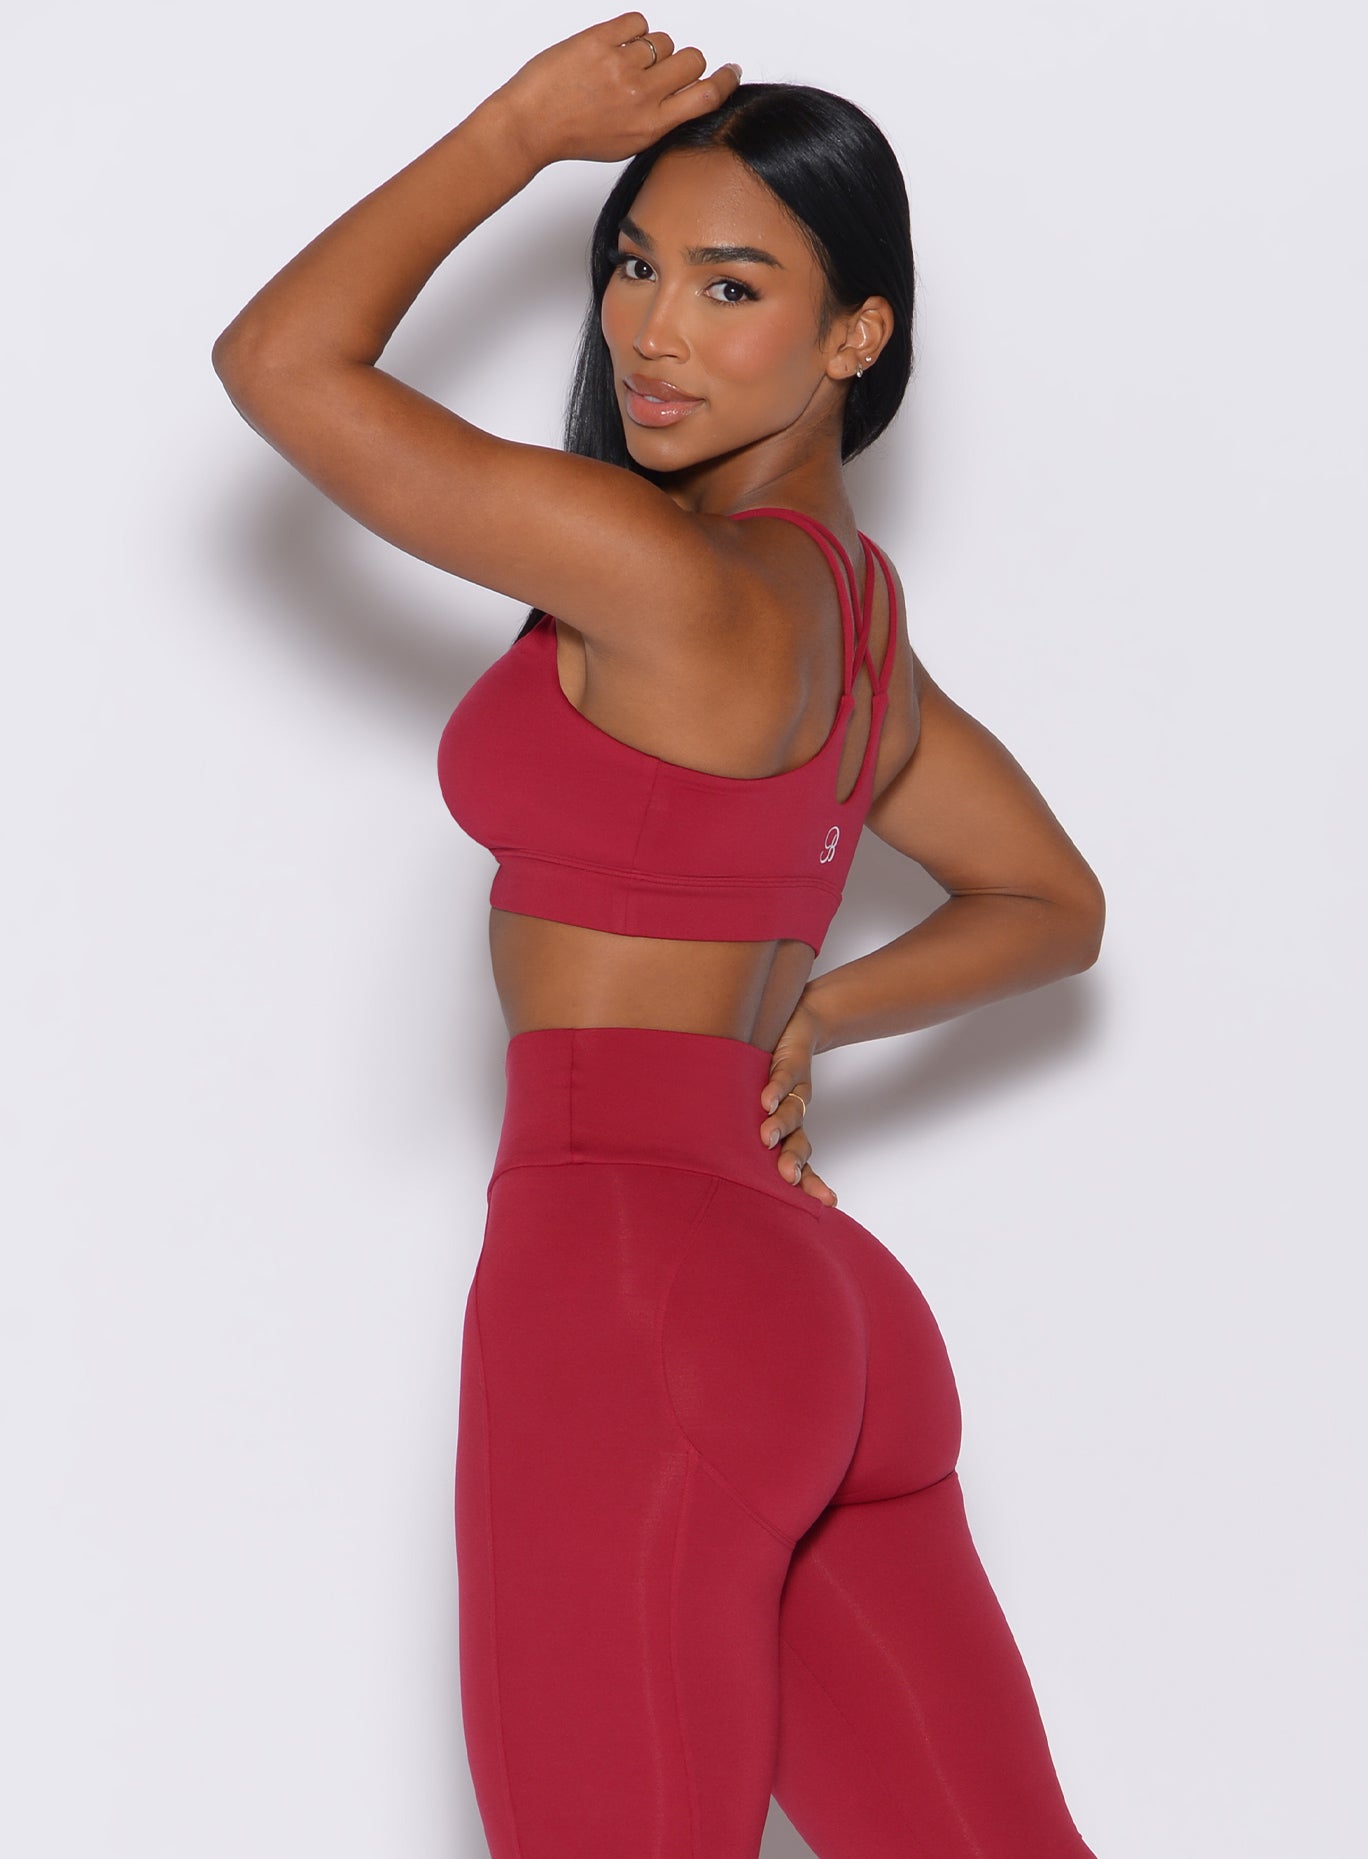 Left side profile view of a model facing to her left wearing our twist sports bra in maroon color along with a matching leggings